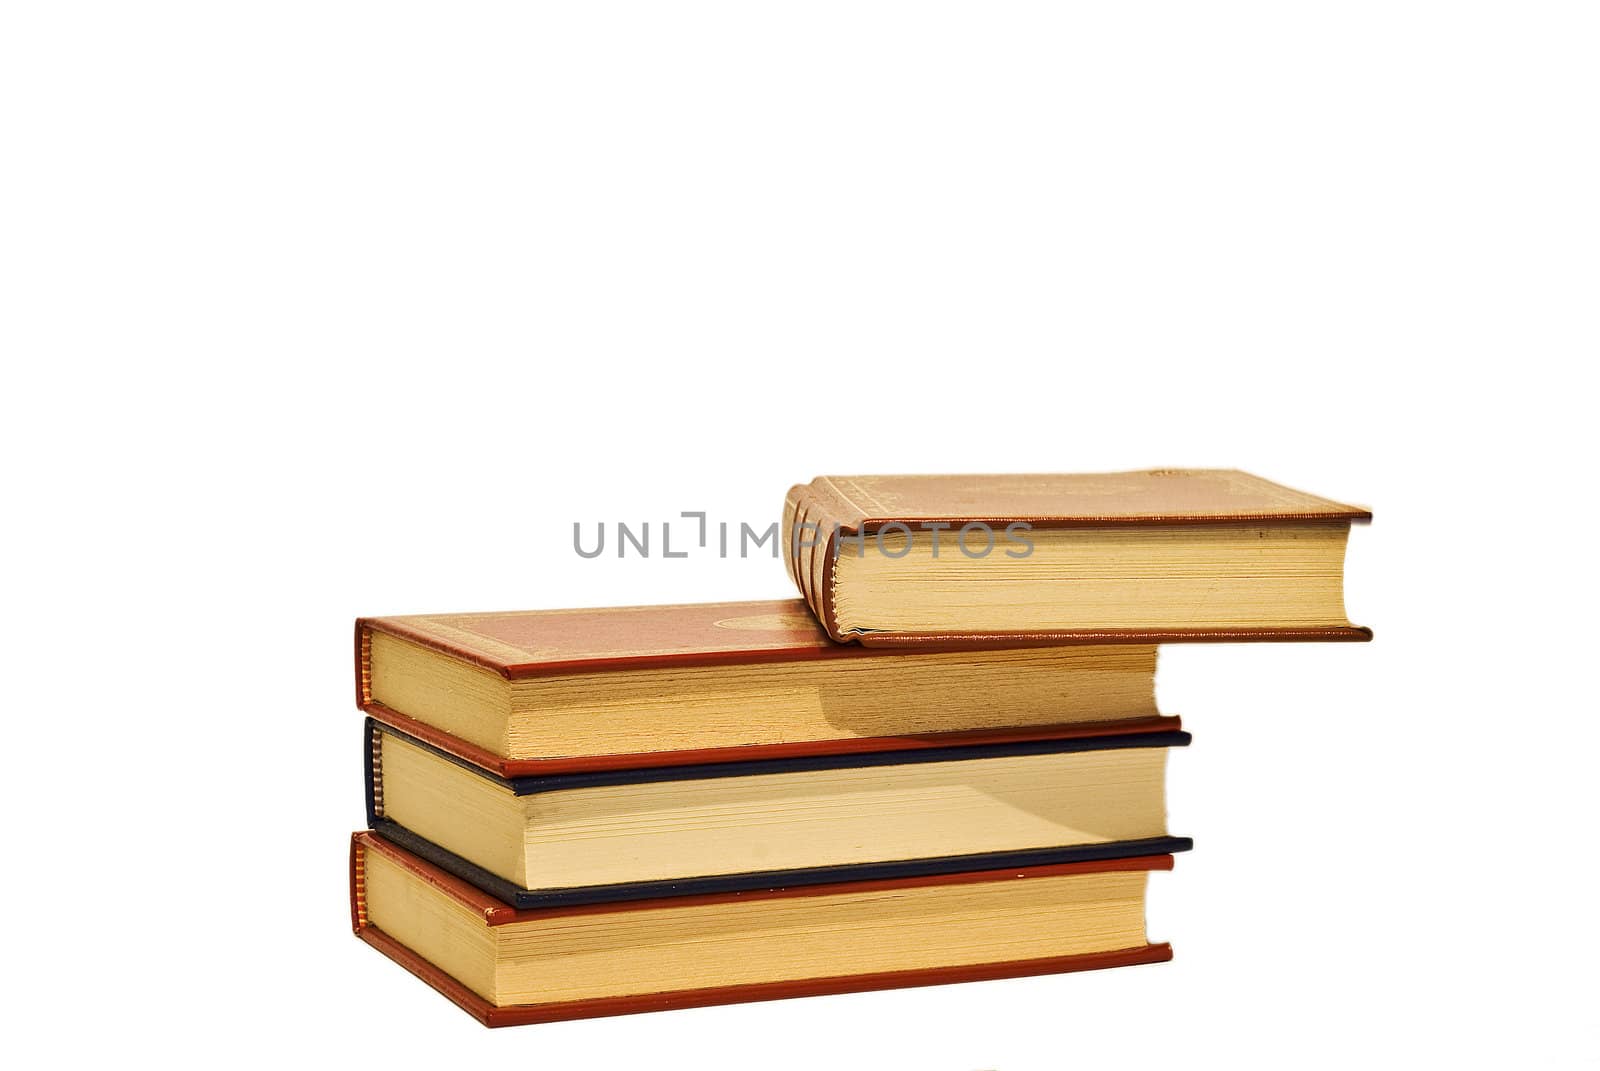 Some old books isolated on white background.